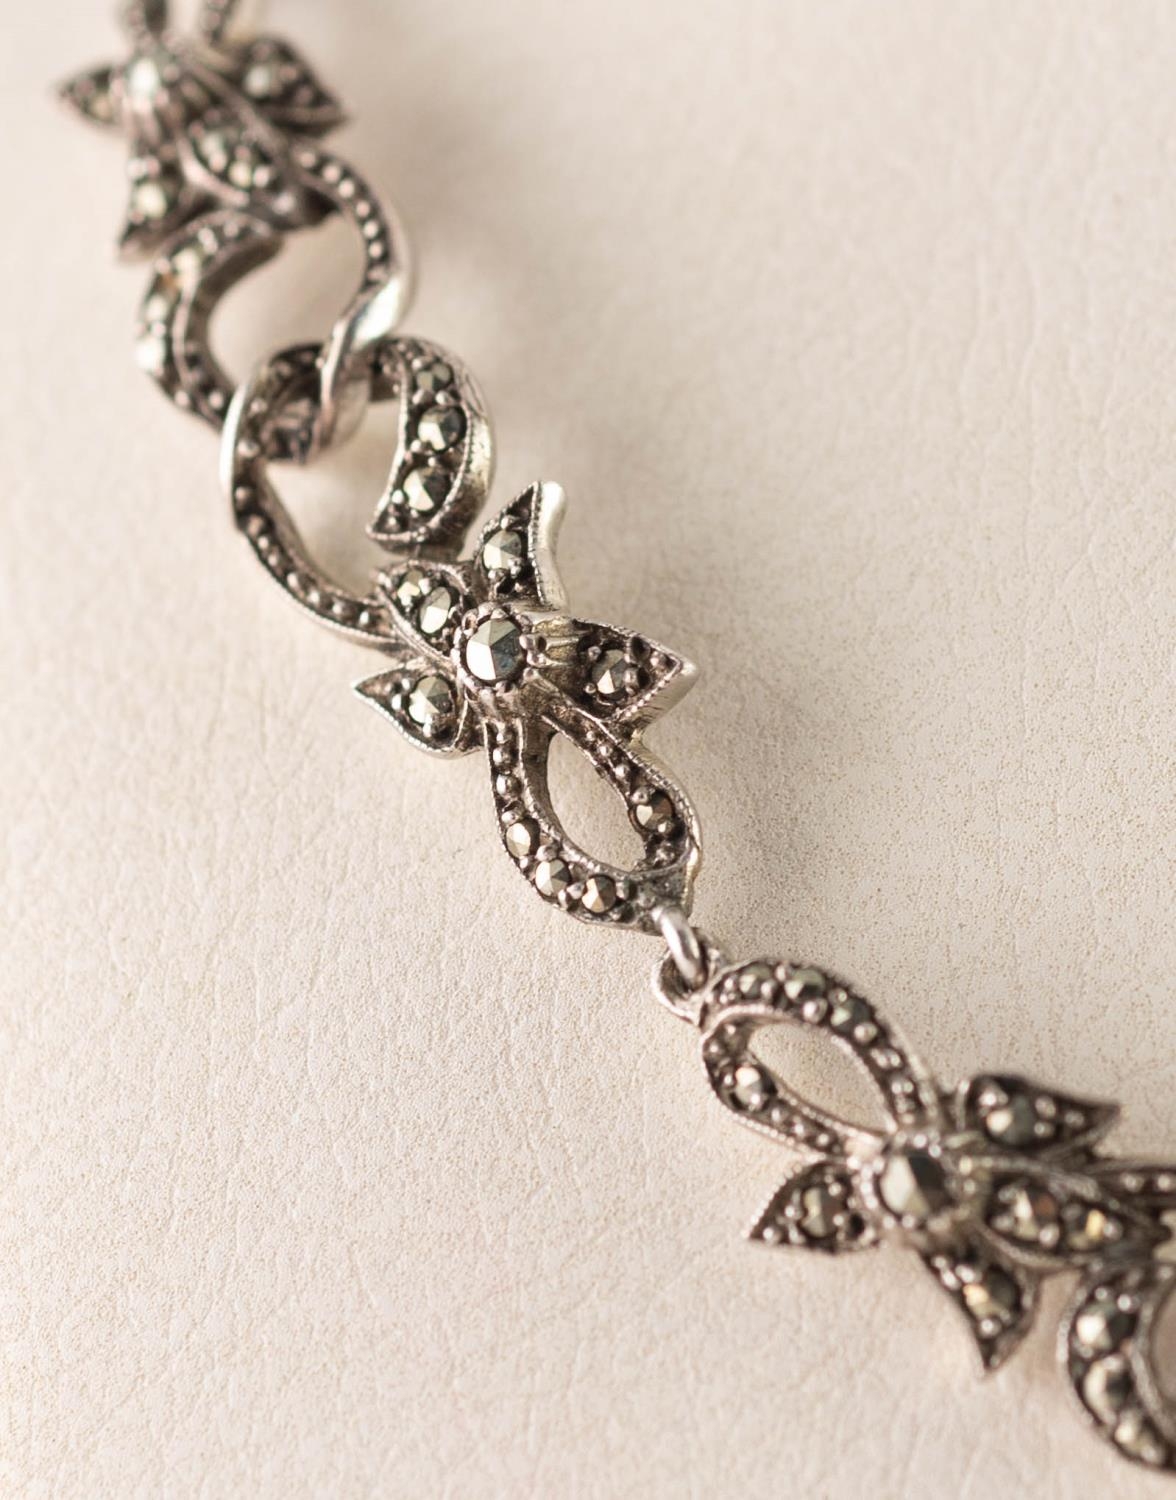 SILVER AND MARCASITE SET SCROLLIATED NECKLACE - Image 2 of 3